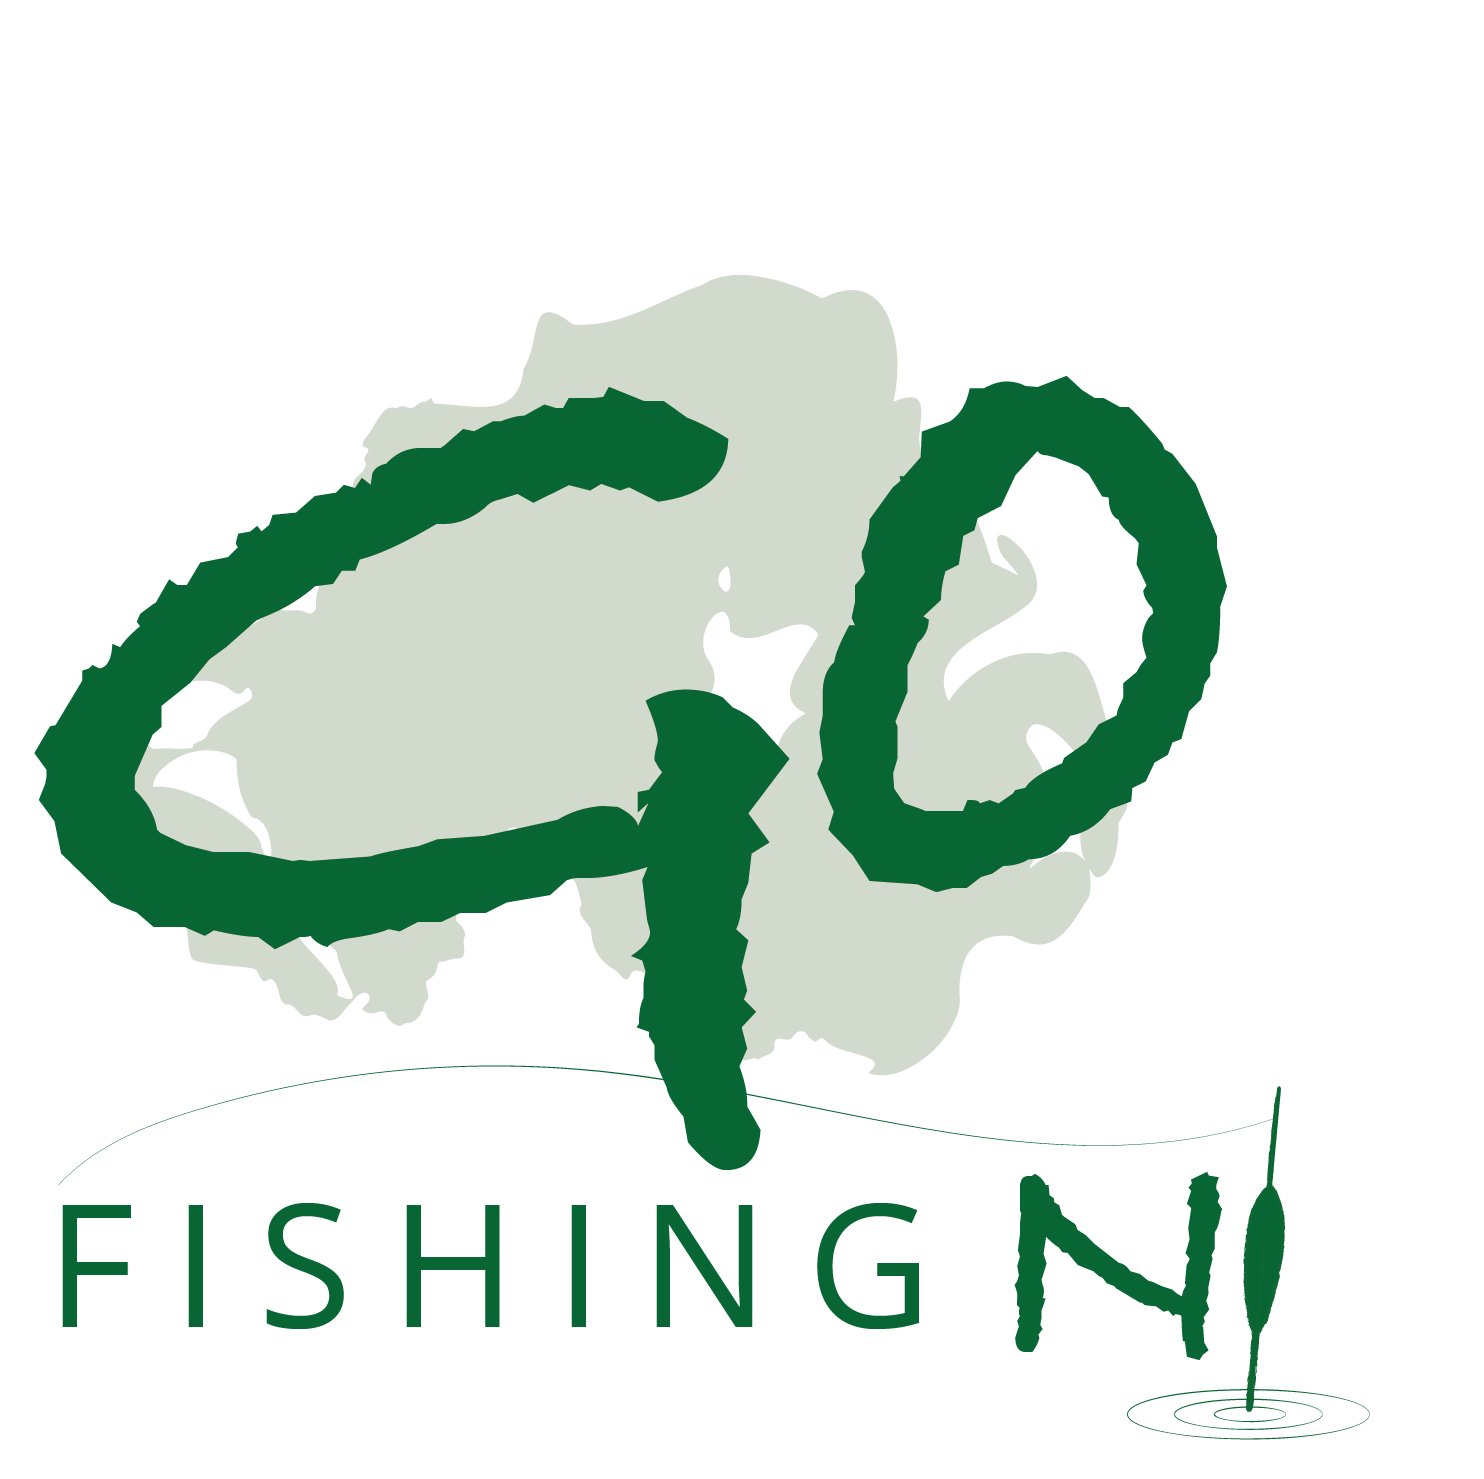 Want to know where to fish in N. Ireland, what permits and licences you require or where to buy your bait and tackle? Go Fishing NI has it all.